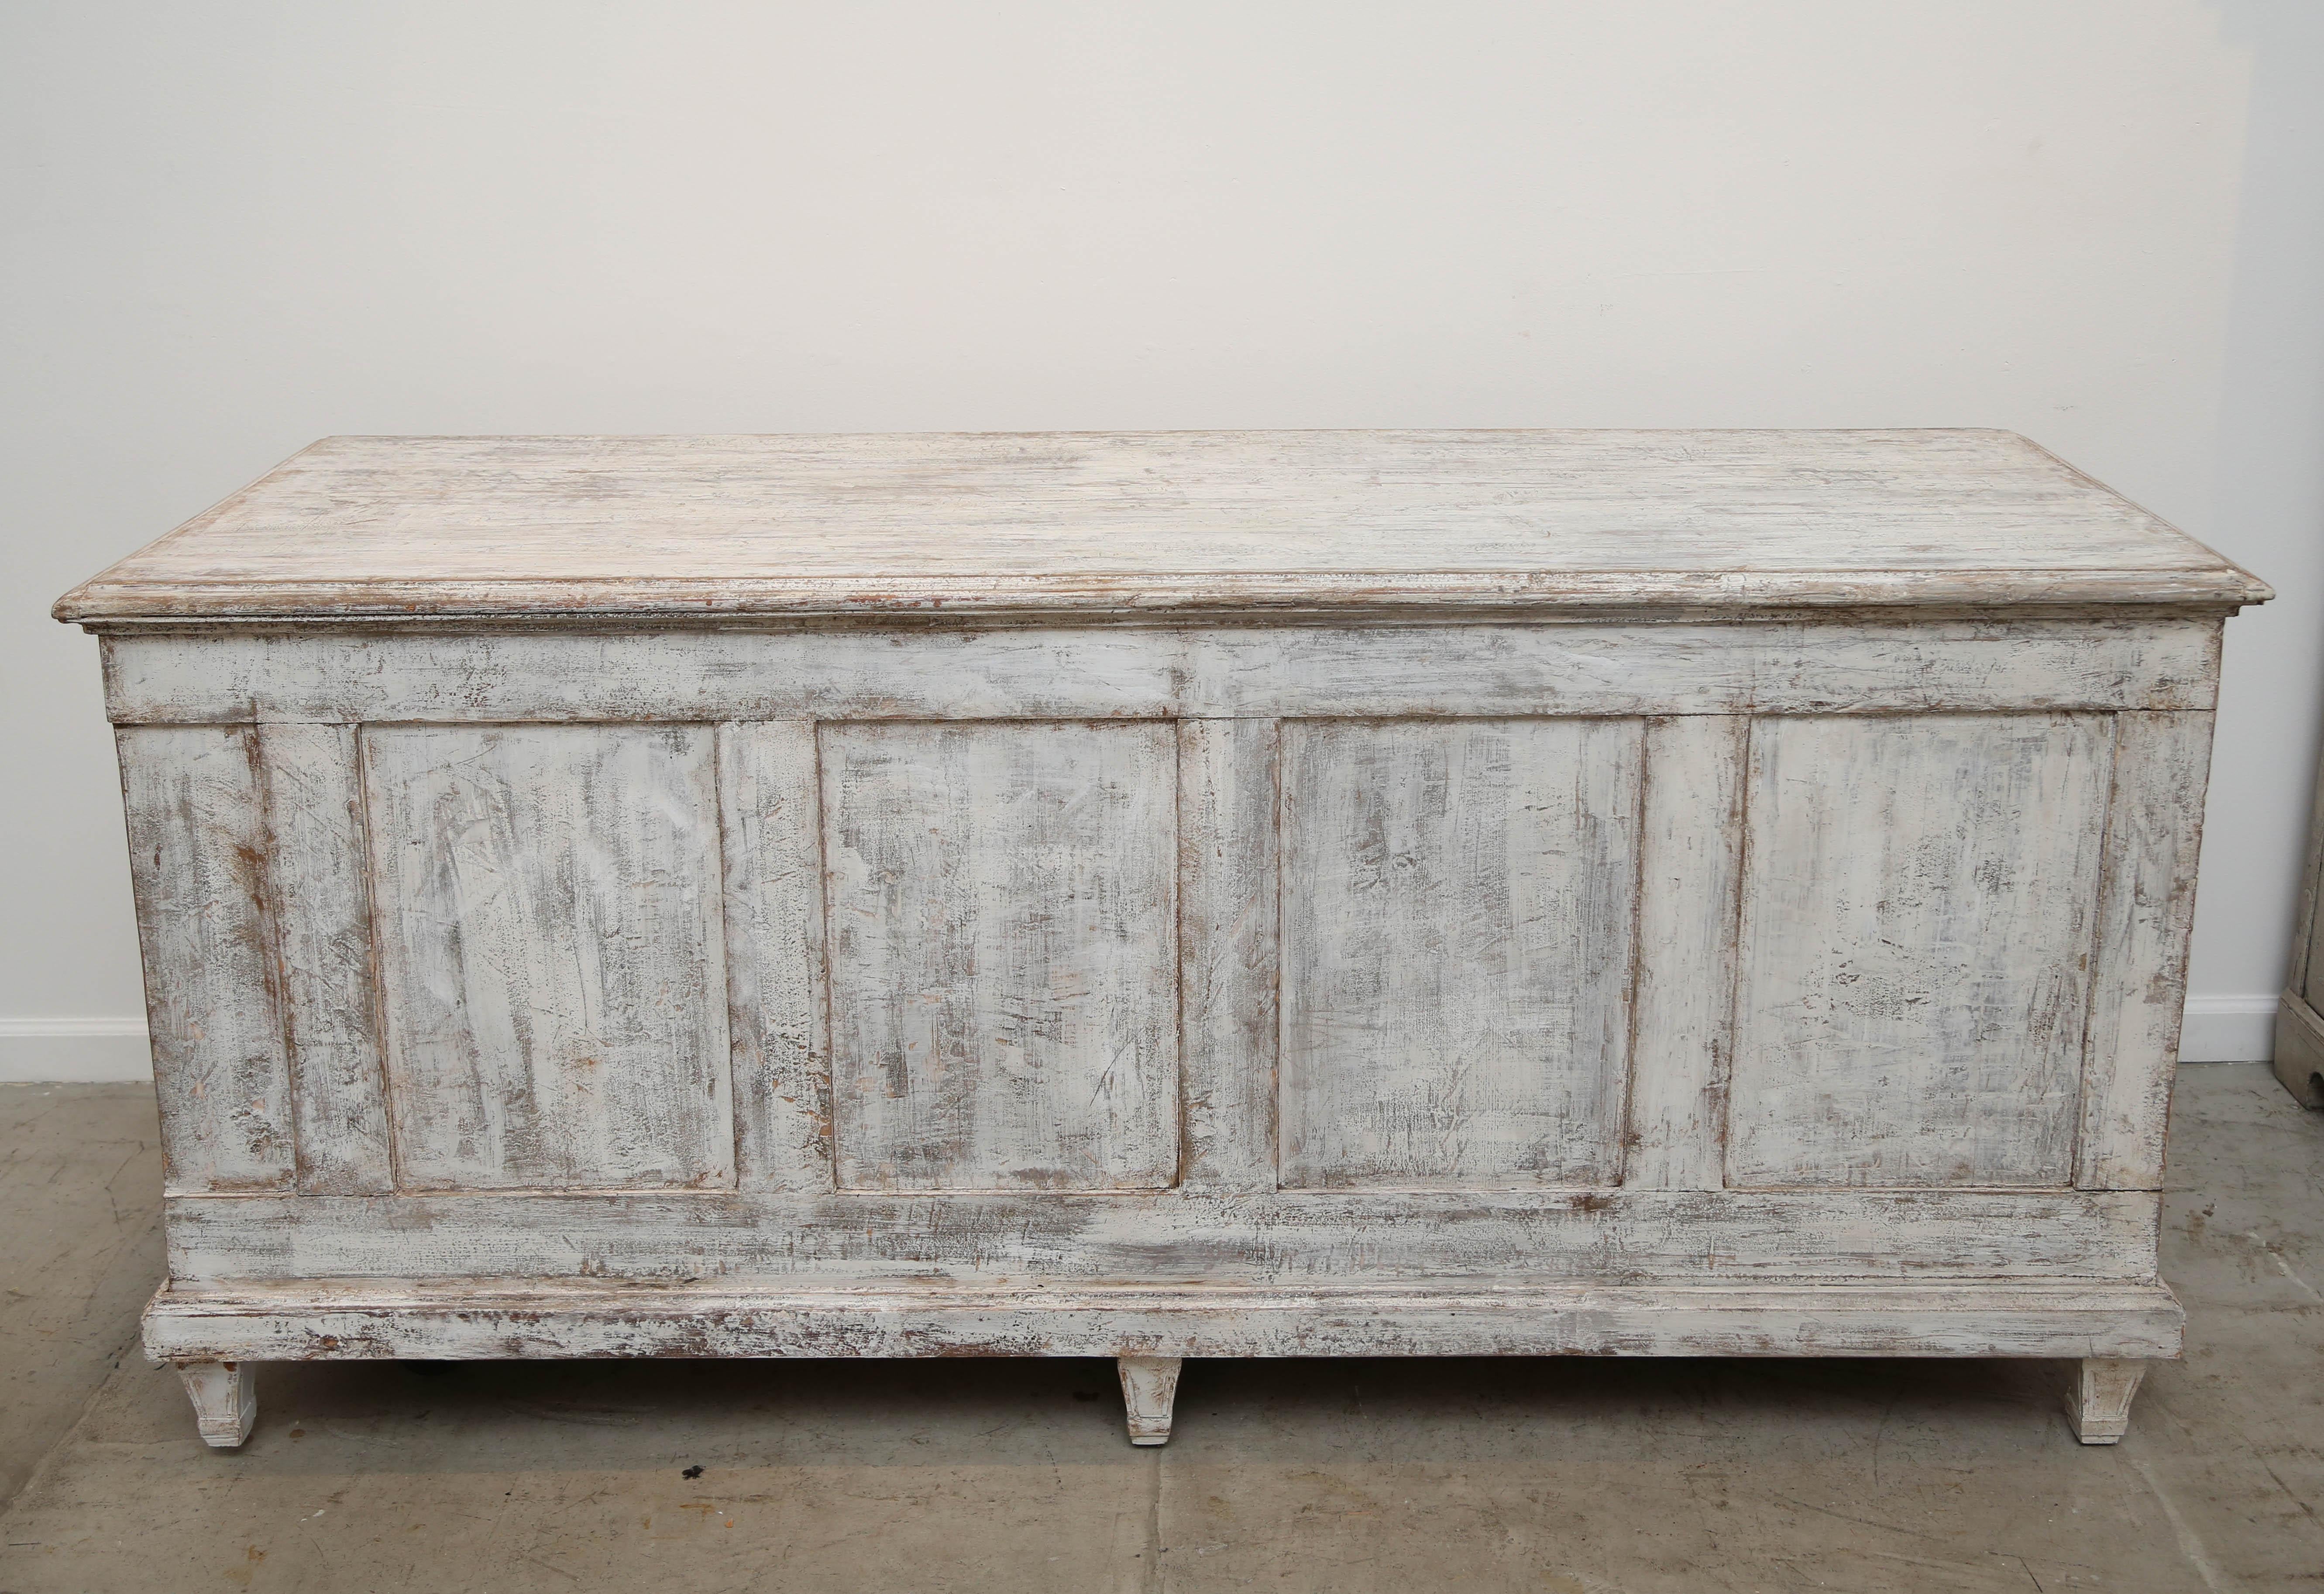 Unique and unusual 15-drawer apothecary cabinet or sideboard that sits on six fluted legs.
Painted in a distressed Swedish white/ivory and dry scraped allowing for the natural wood patina to subtlety show through.
The back of the piece is finished